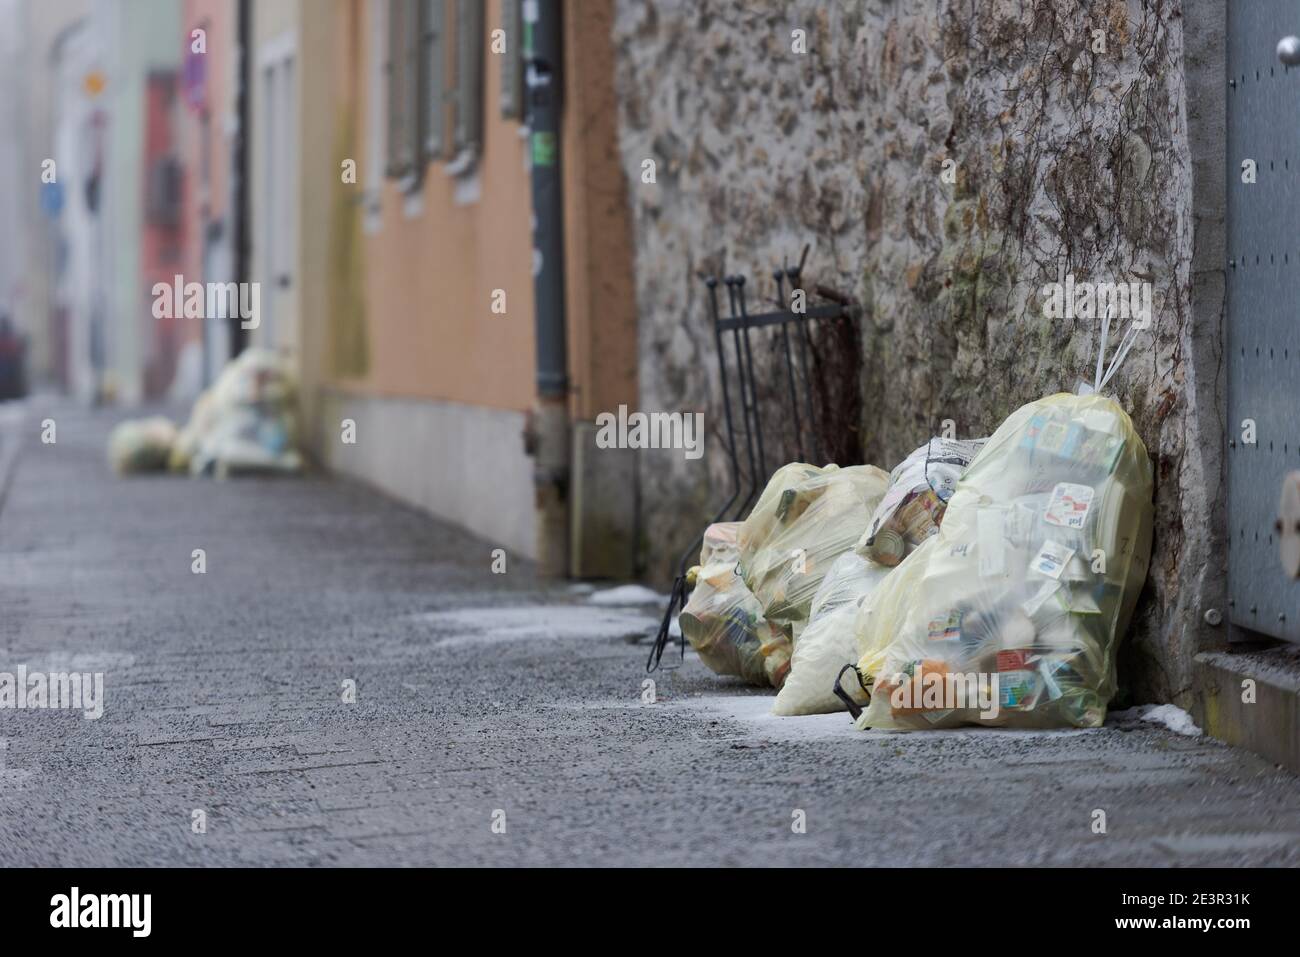 Yellow plastic sacks containing plastic garbage piled up near front-doors on sidewalk of street for waste collection in old town with stone houses Stock Photo